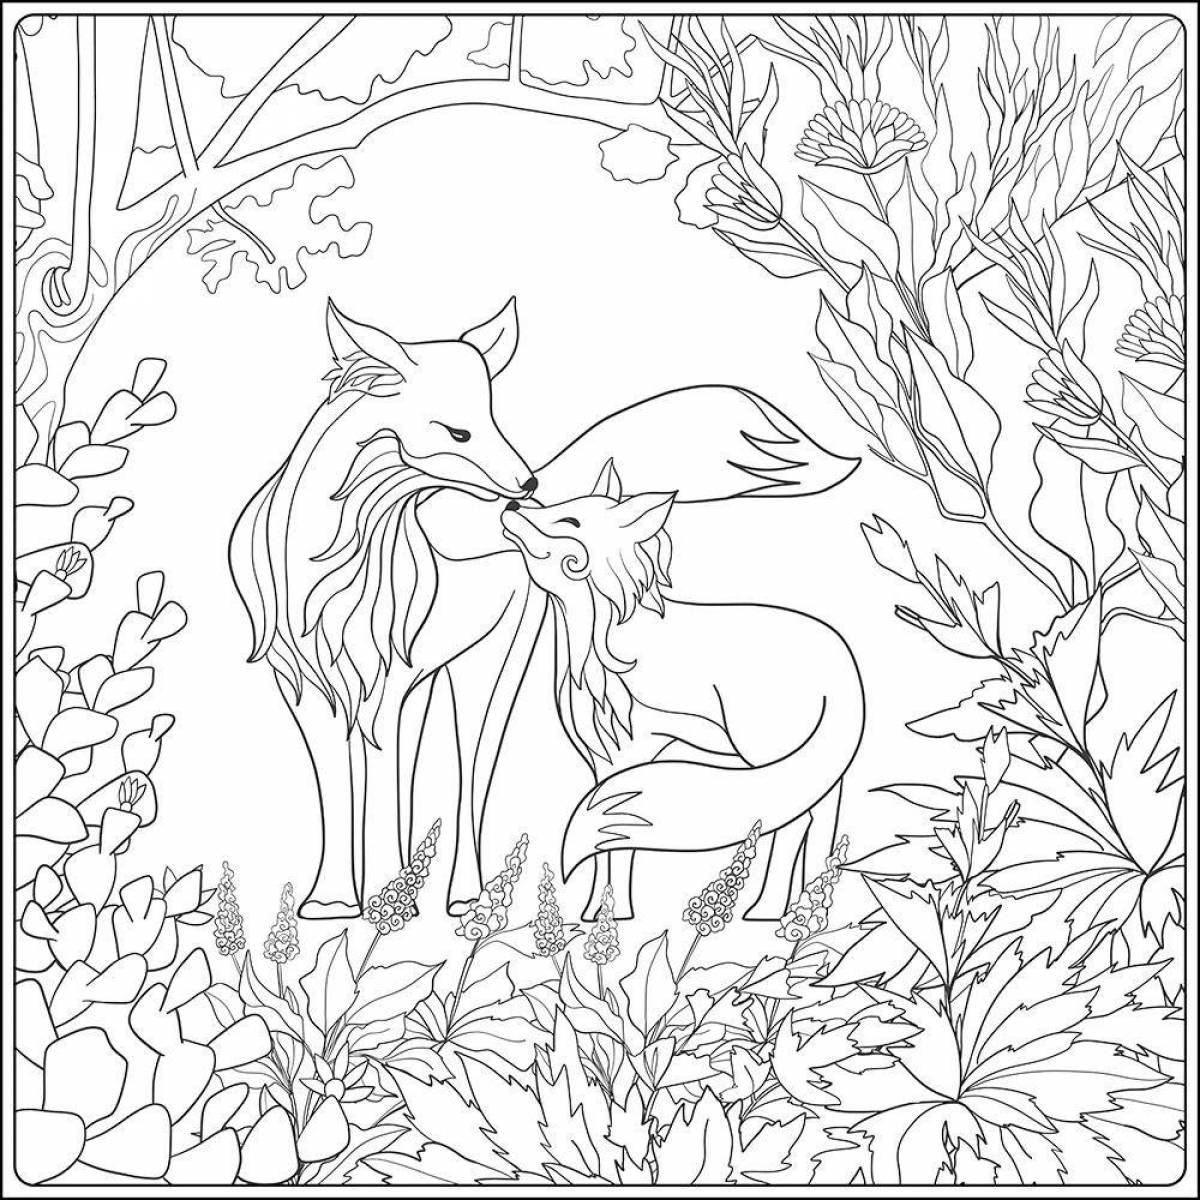 Coloring book gorgeous black grouse and fox